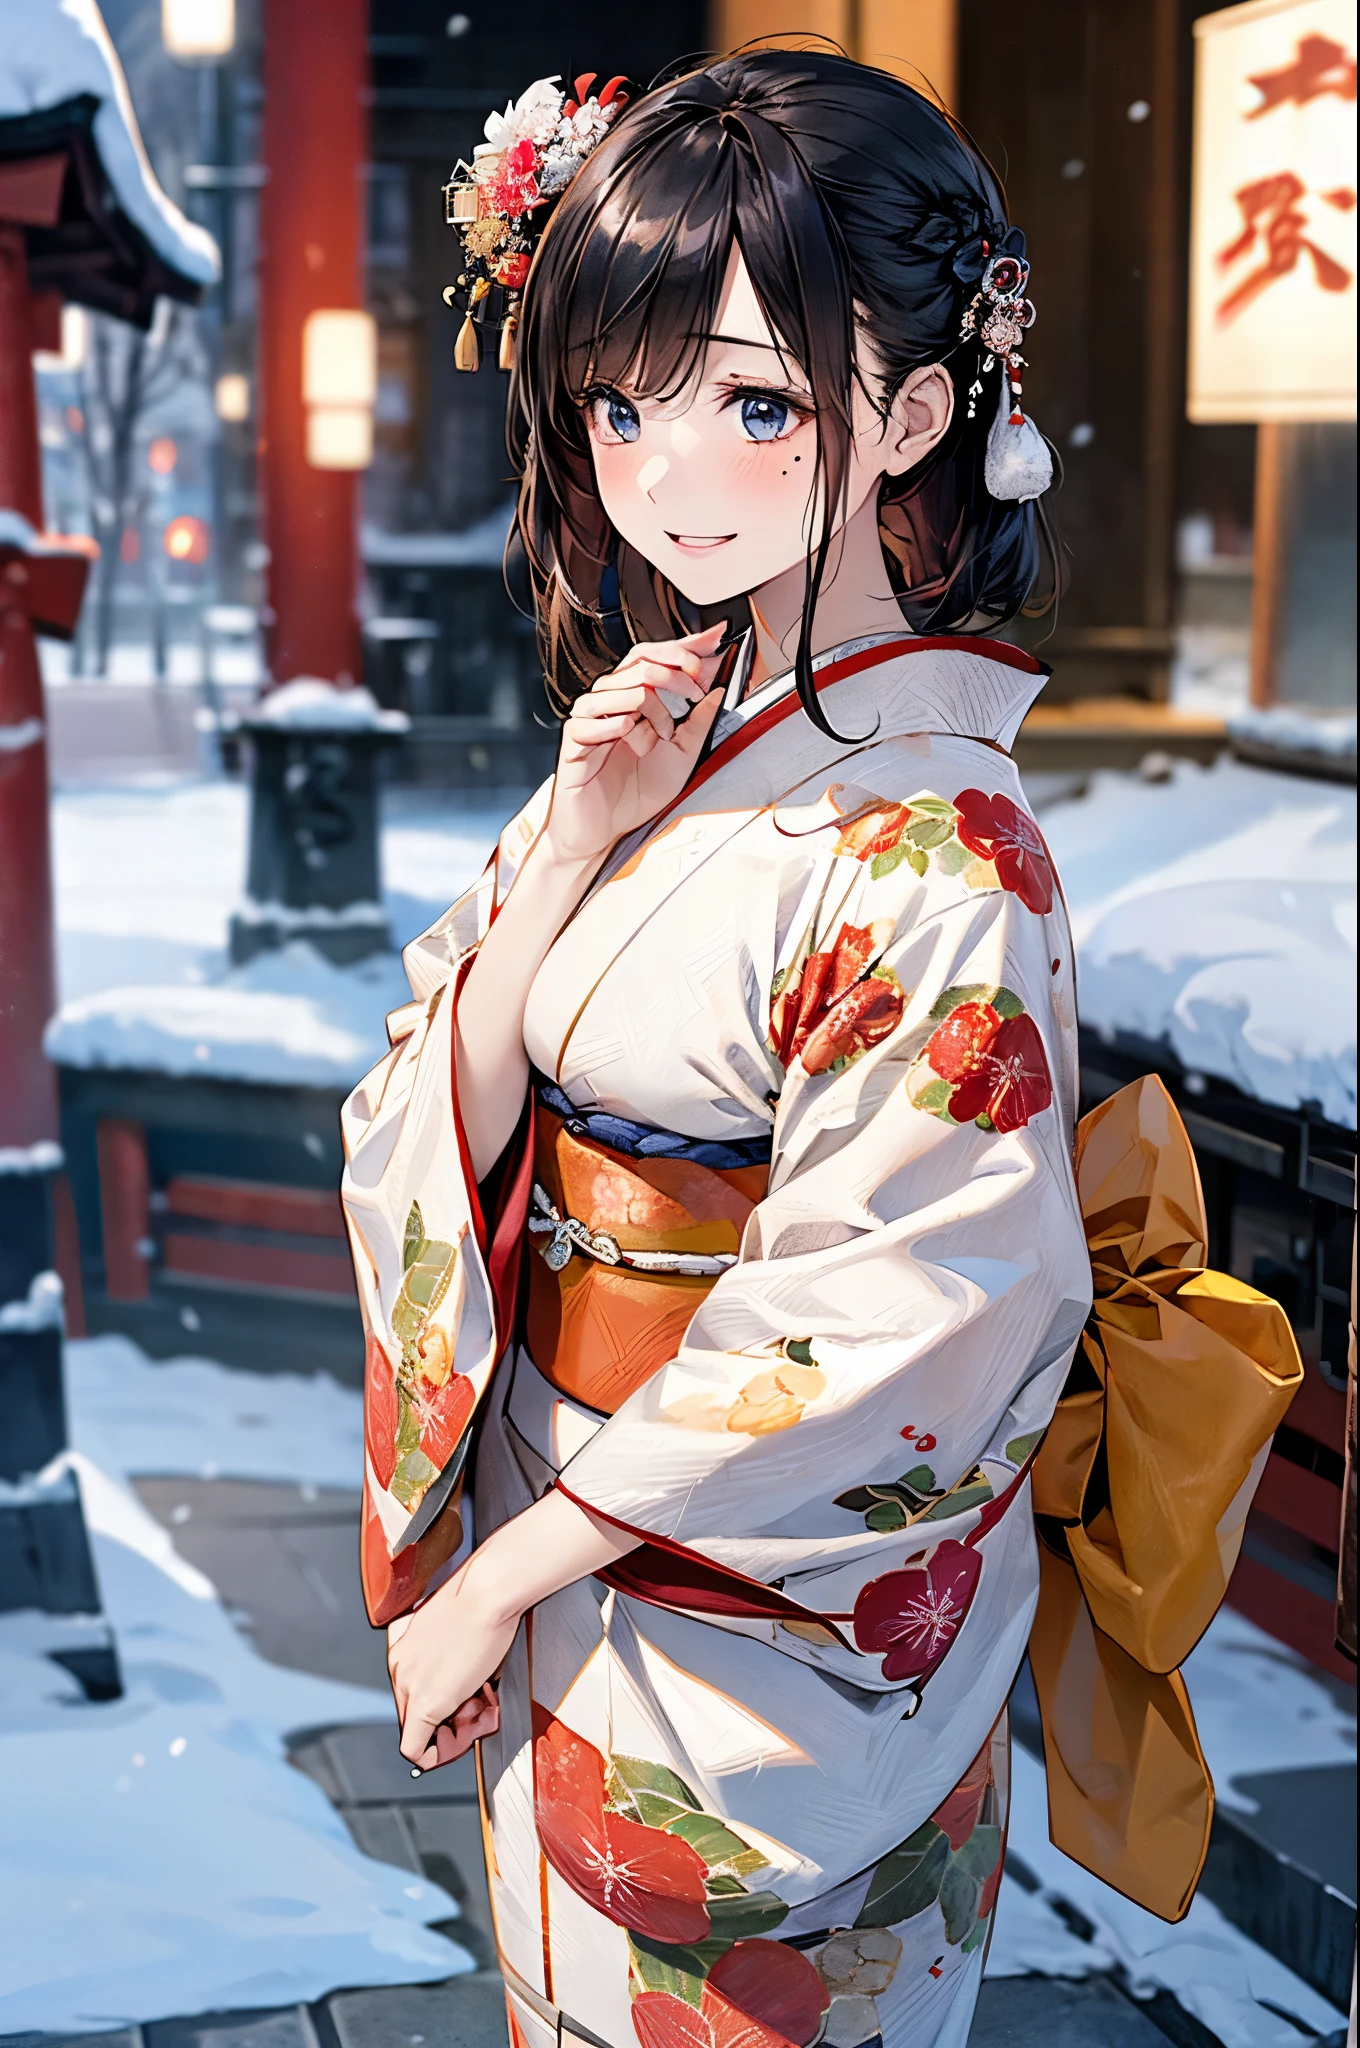 ((perfect anatomy, anatomically correct, super detailed skin)), 
1 girl, japanese, high school girl, shiny skin, large breasts:0.5, looking away, looking up, watching the view, from below, 
beautiful hair, beautiful face, beautiful detailed eyes, (middle hair:1.5, japanese hair:1.5), black hair, blue eyes, babyface, mole under eye, 
((red floral kimono, hair ornament)), 
((smile:1.5, open your mouth wide)), walking, 
(beautiful scenery), winter, dawn, (new year's day, first visit), hokkaido, sapporo, outside hokkaido shrine, crowd, snow, snowfall:1.5, freezing weather, frost, 
(8k, top-quality, masterpiece​:1.2, extremely detailed), (photorealistic), beautiful illustration, natural lighting,